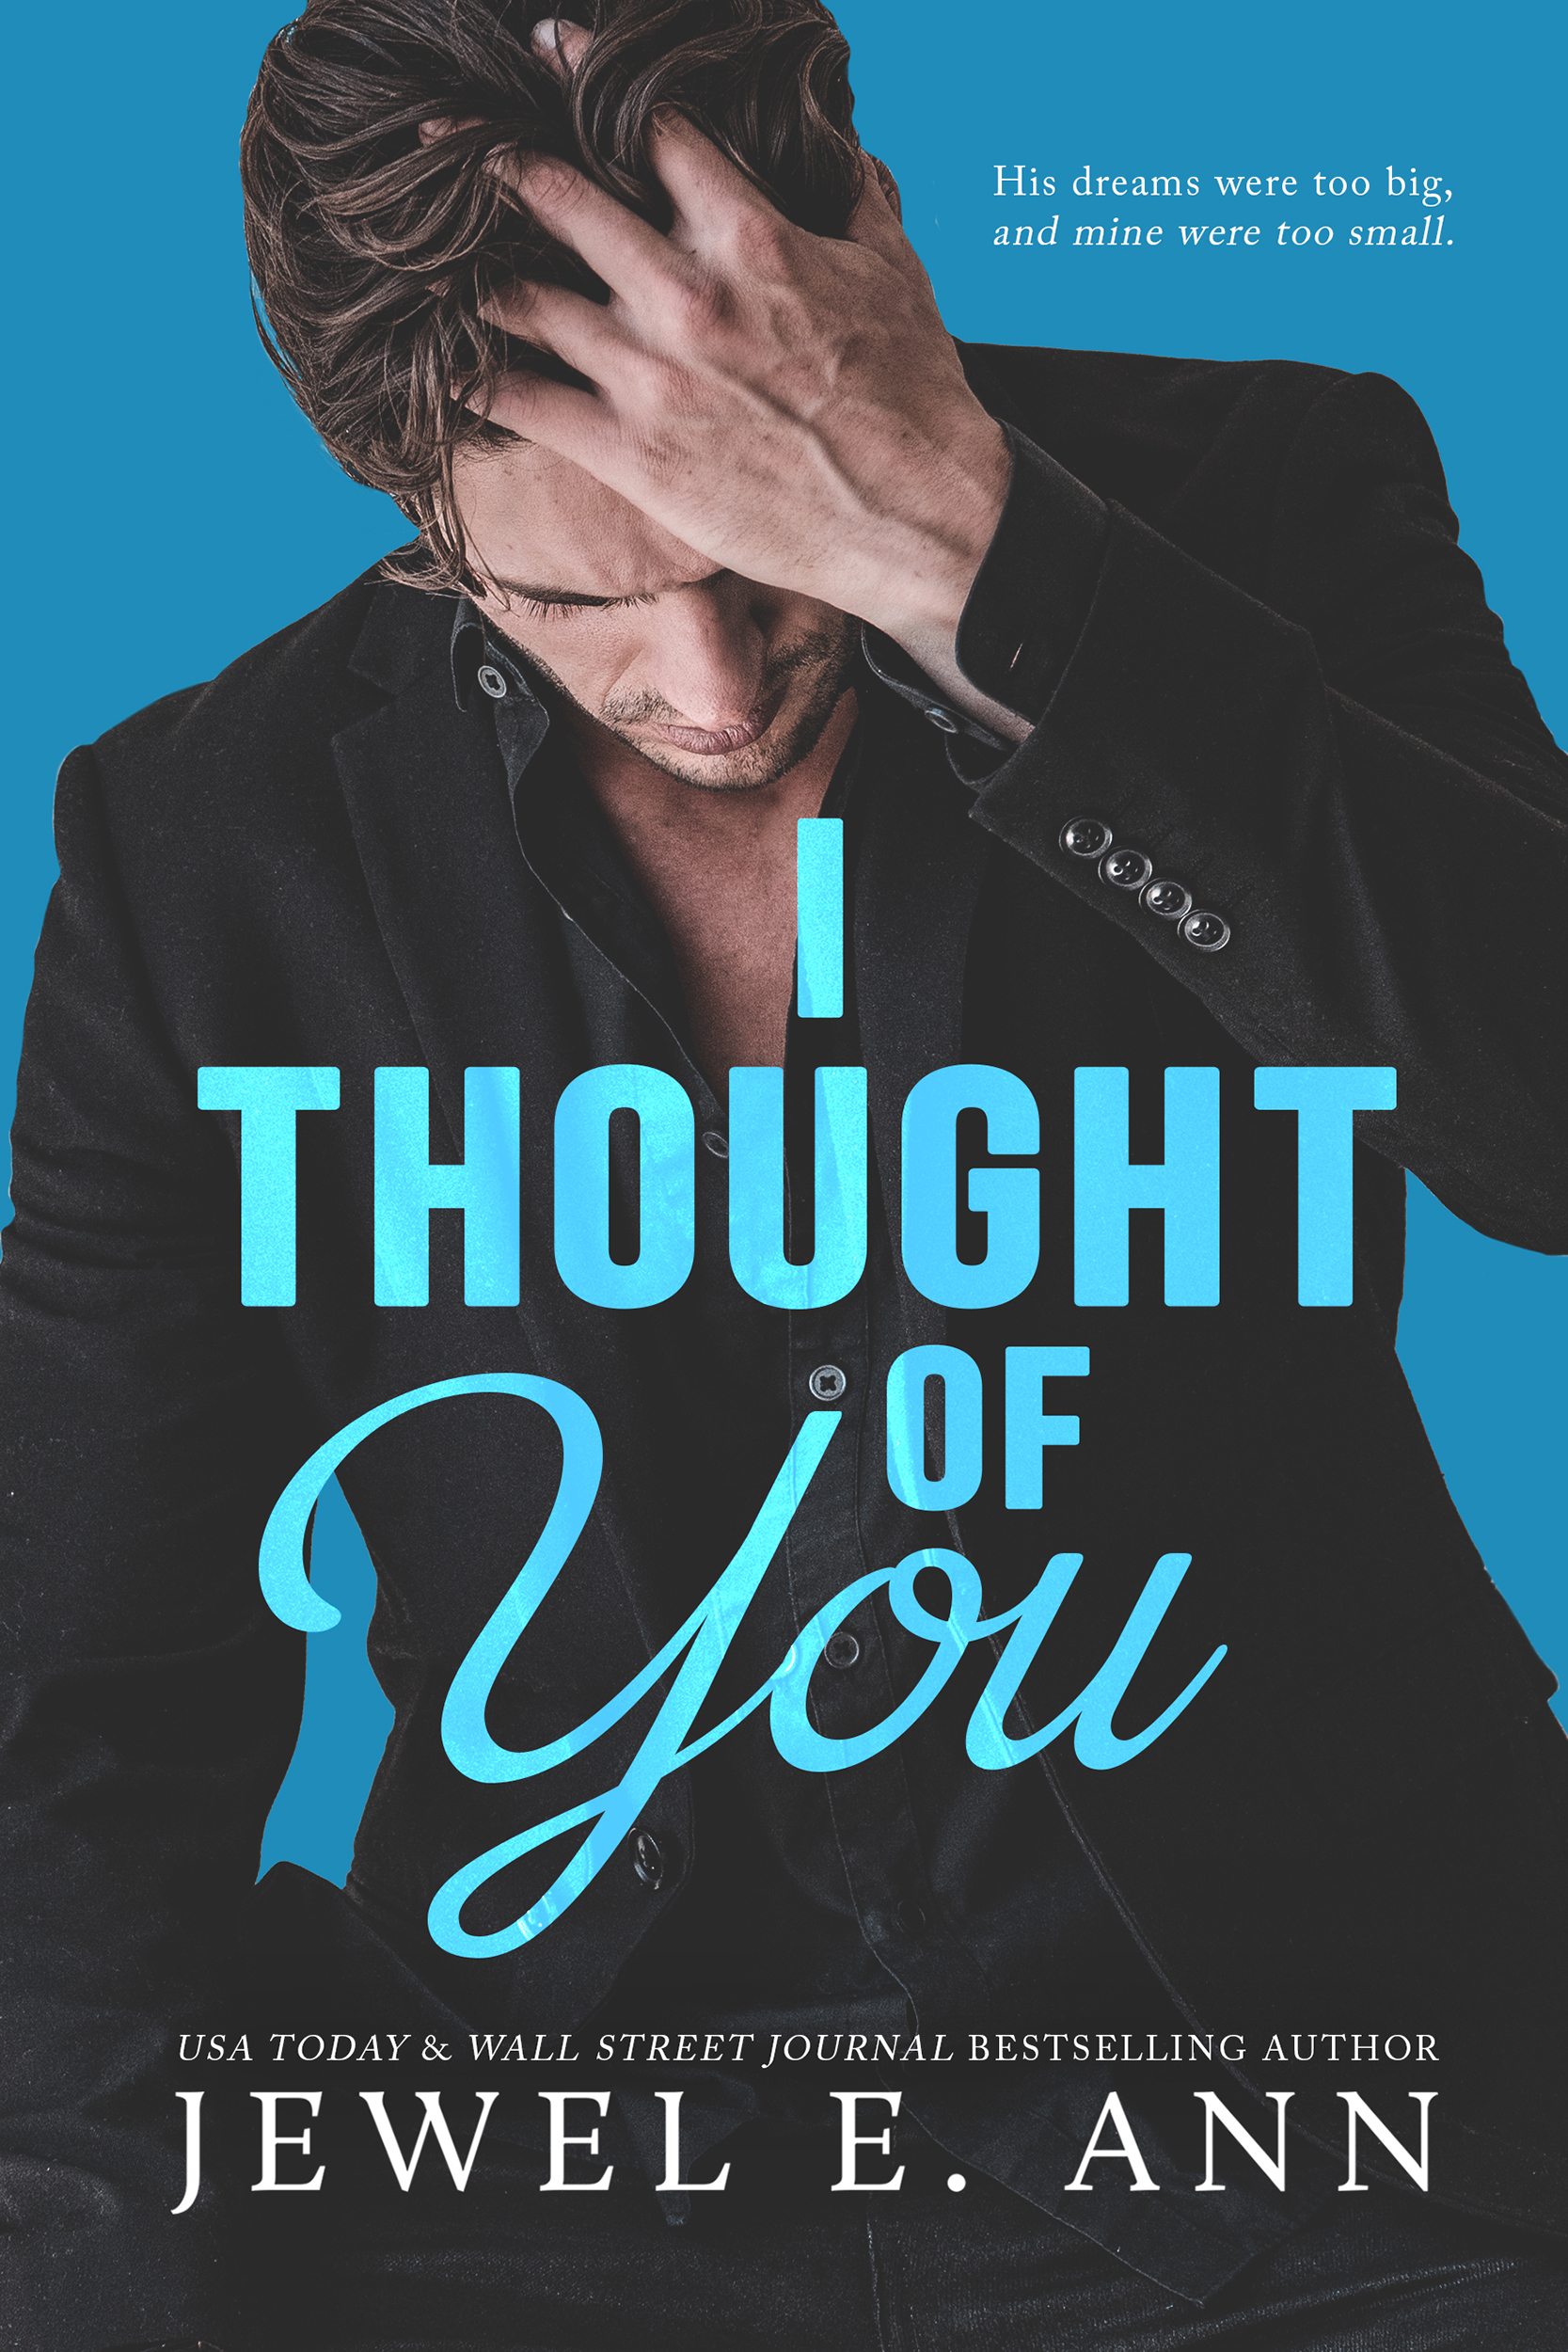 Review: I Thought of You by Jewel E. Ann